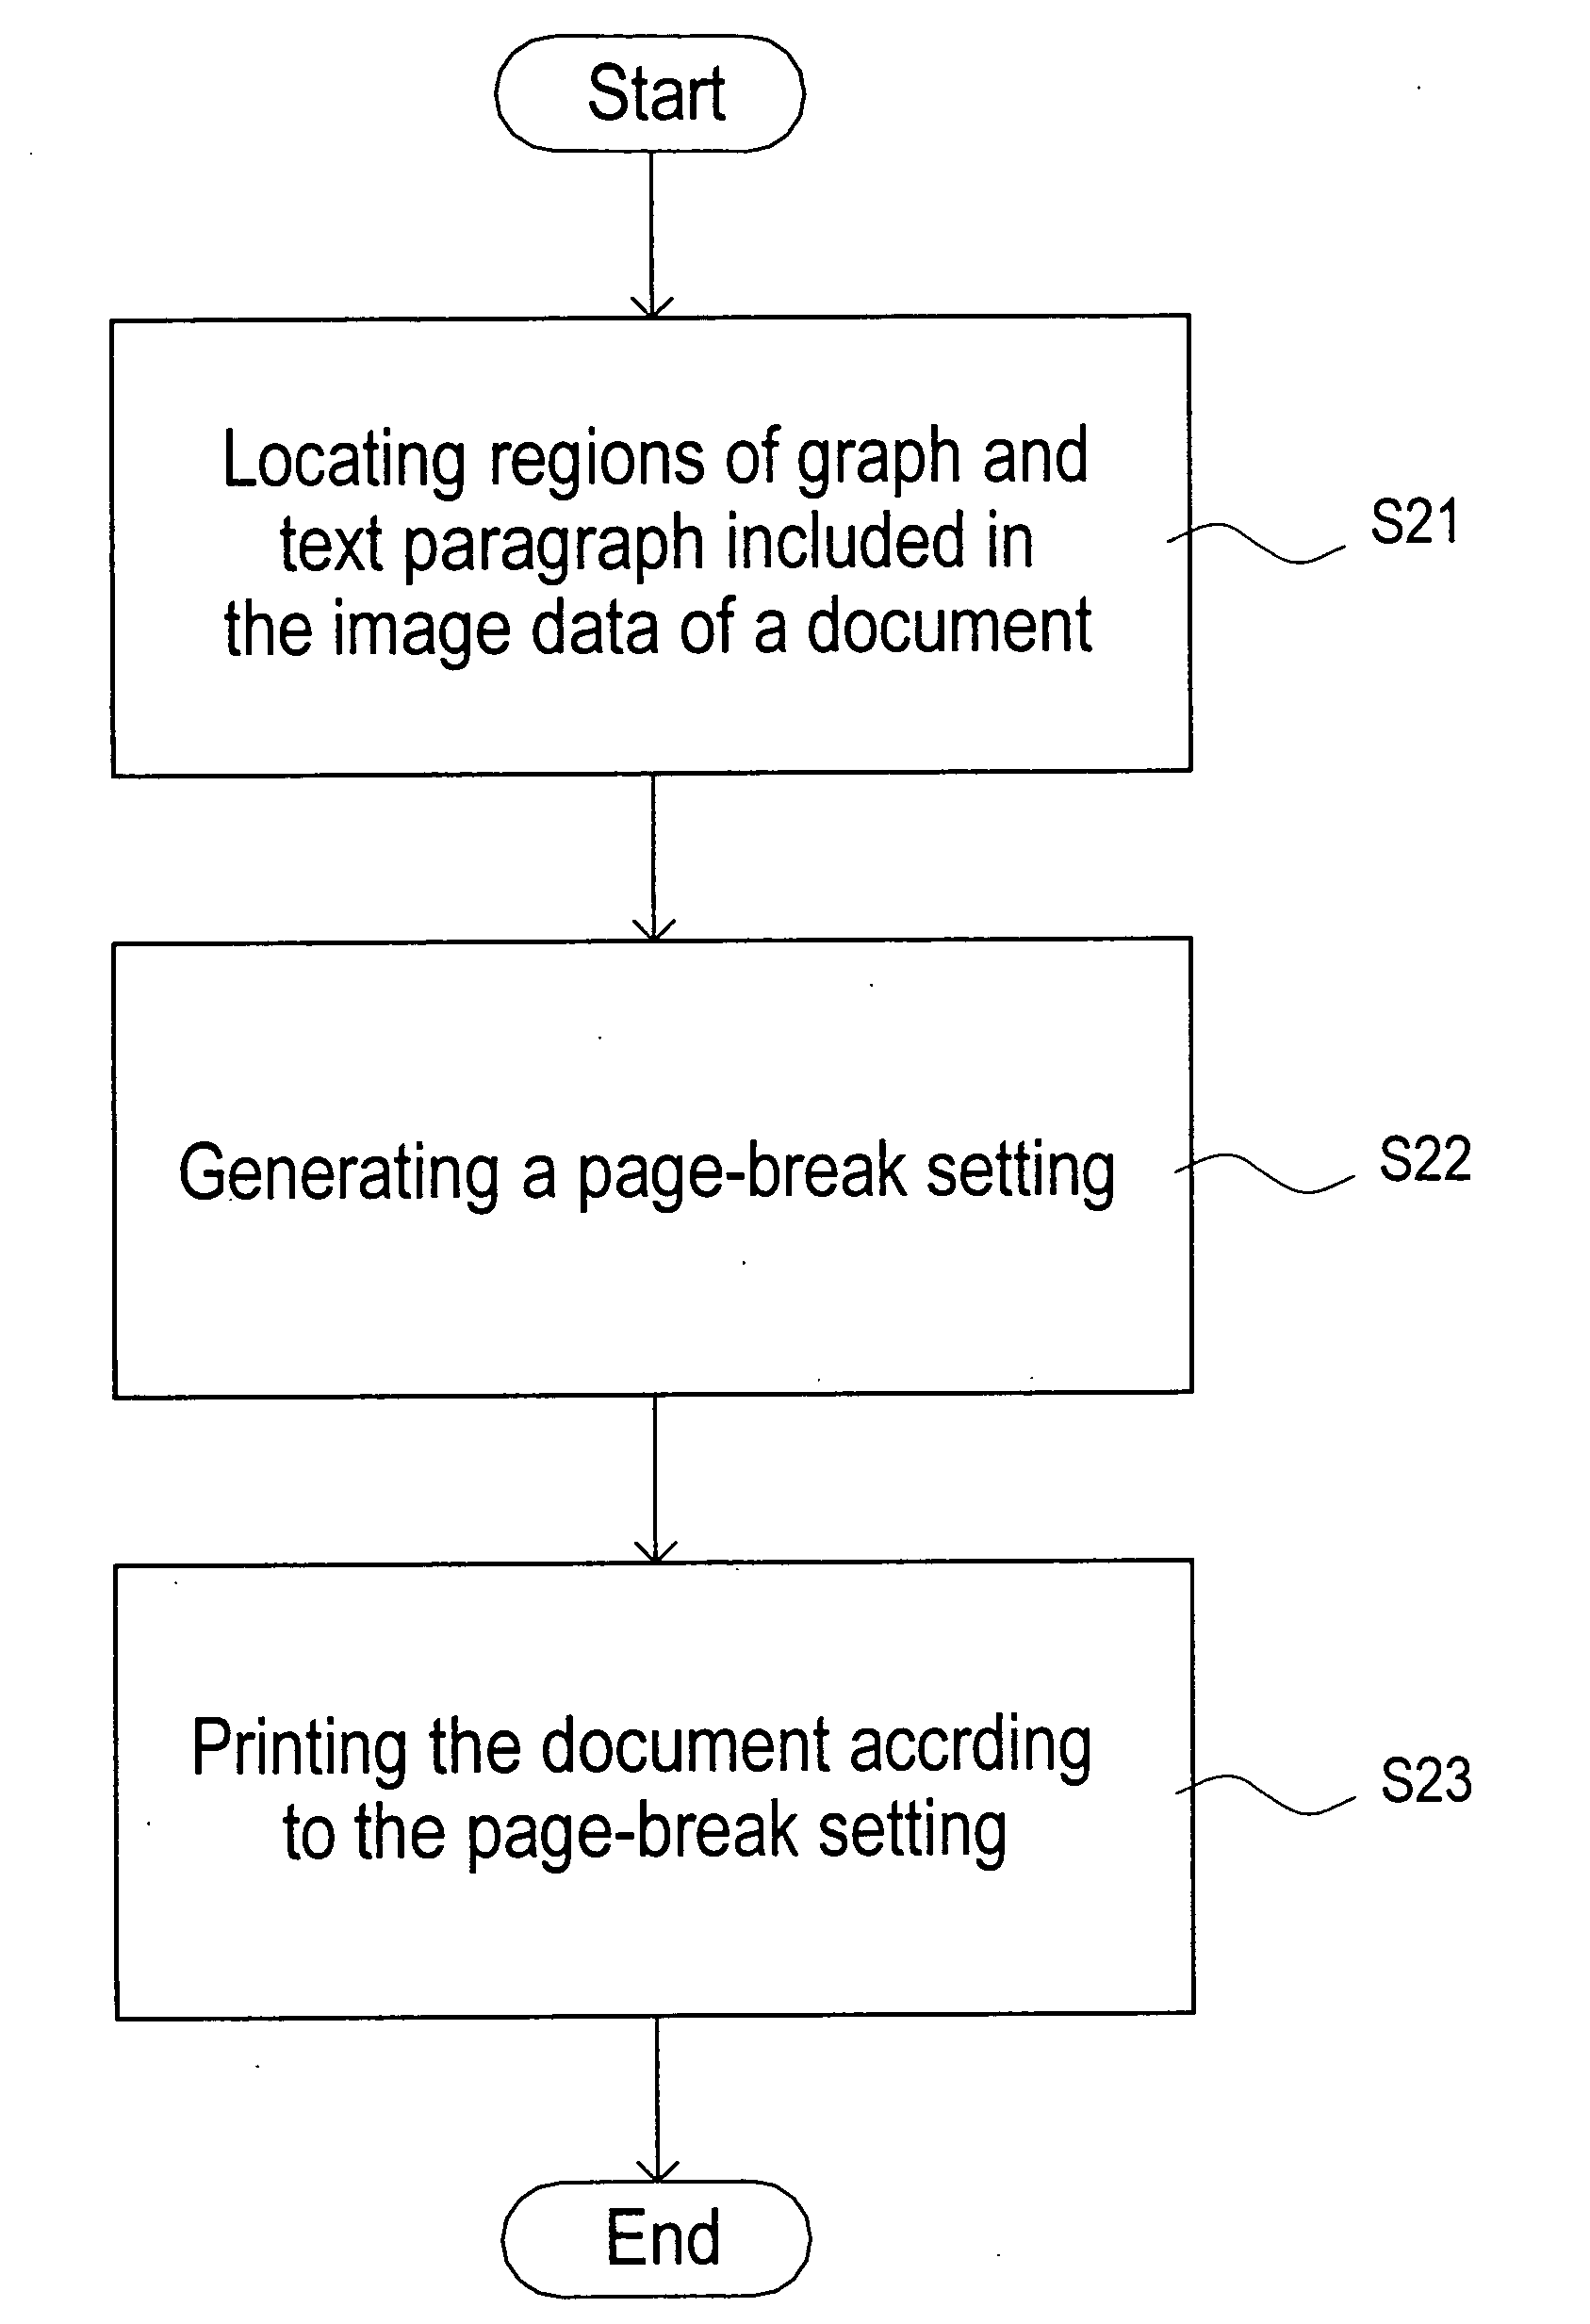 Page-break creating method for printing document